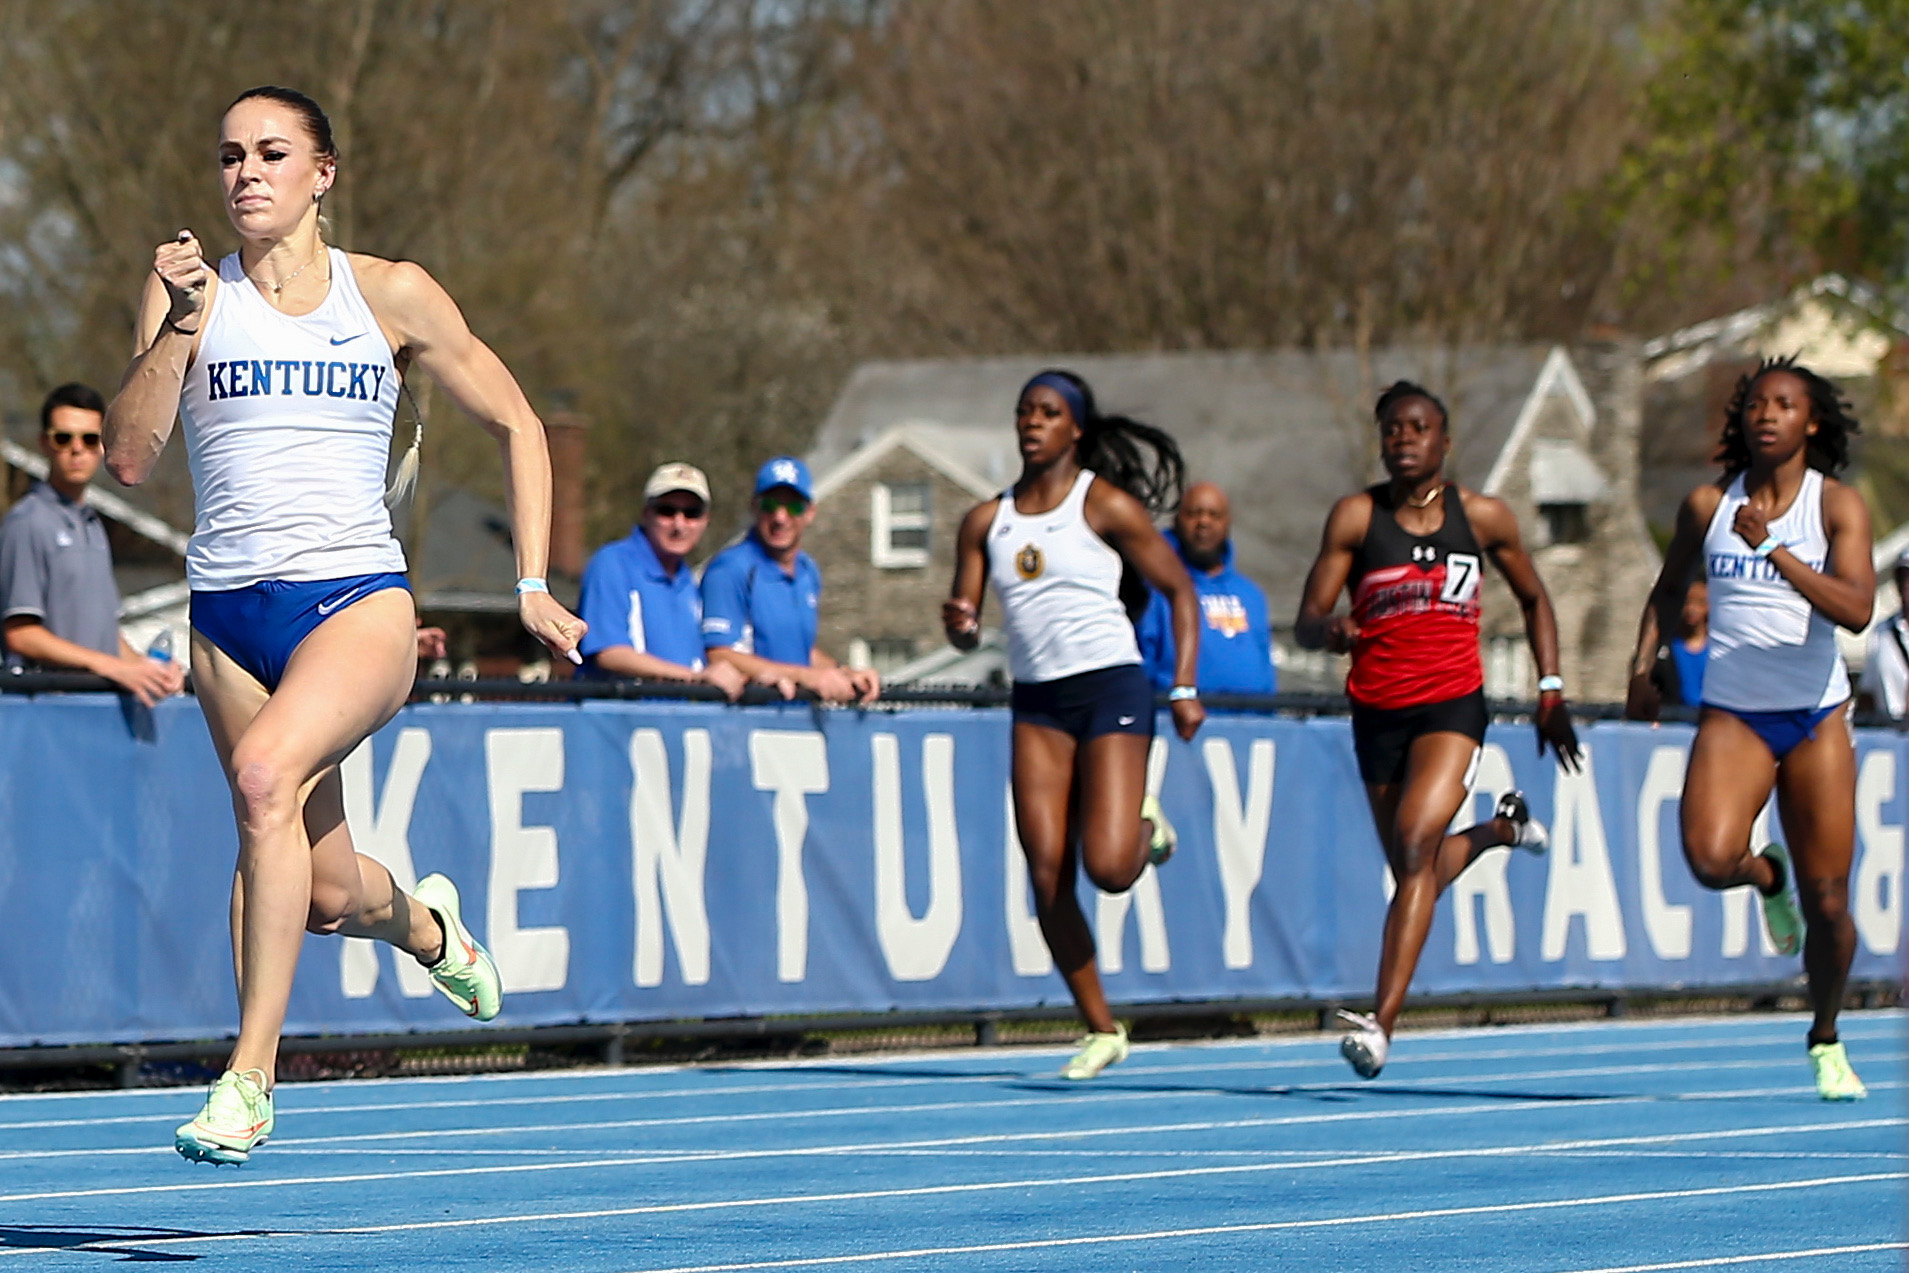 Steiner Runs NCAA No. 3 All-Time 200m Time at Kentucky Invitational